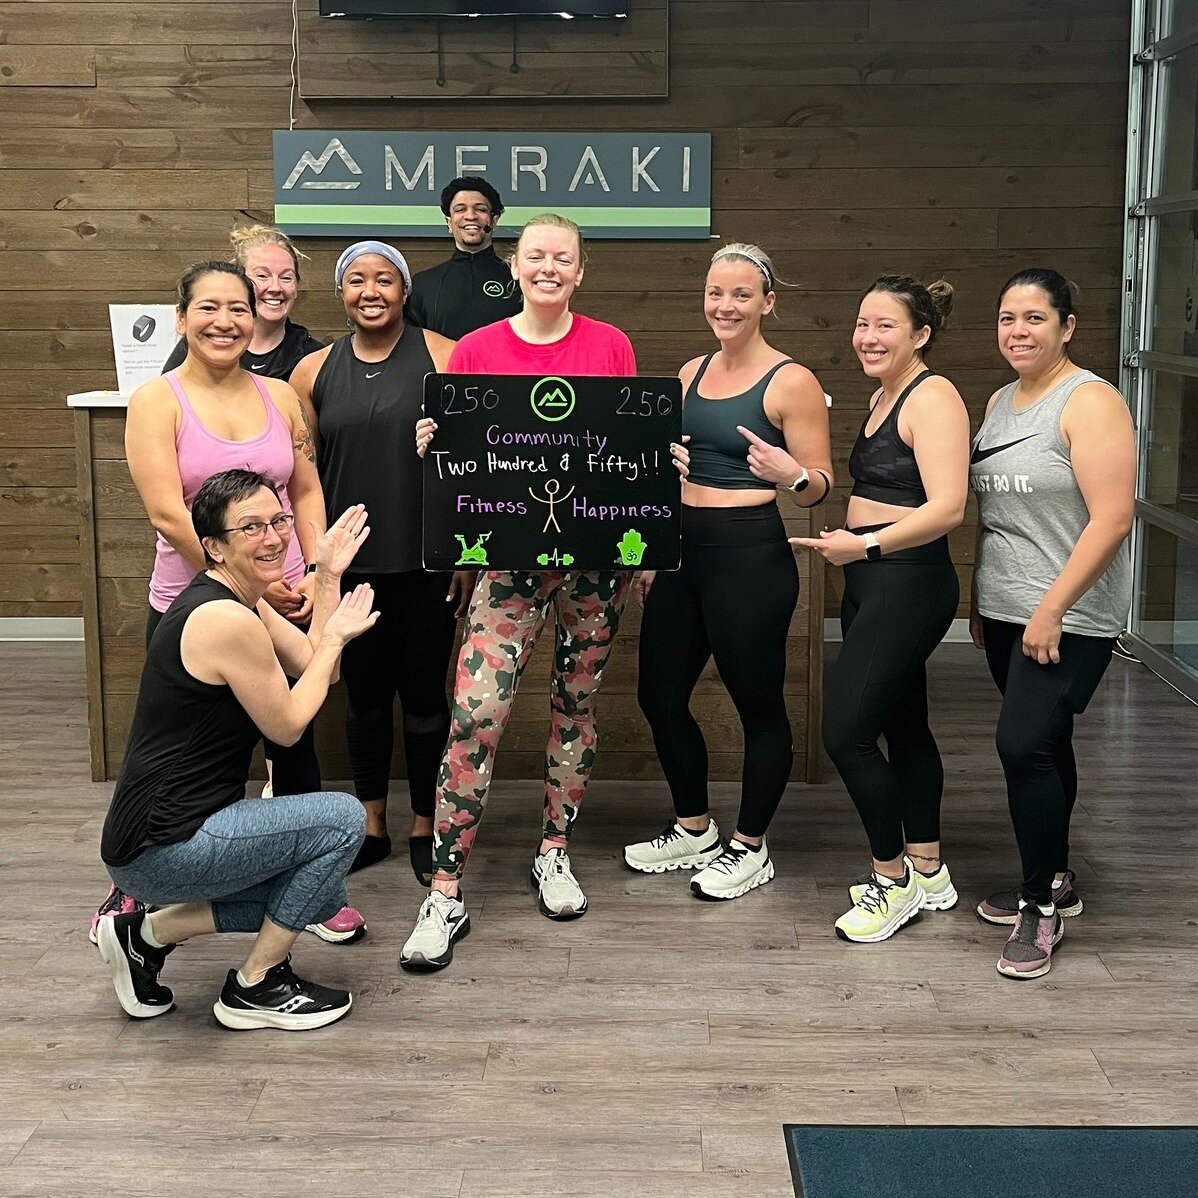 A massive round of applause for Melissa for completing 250 workouts! Your discipline and perseverance are incredibly admirable. Keep up the fantastic effort and enjoy the results! Here's to even more milestones ahead!

Thank you for being part of our